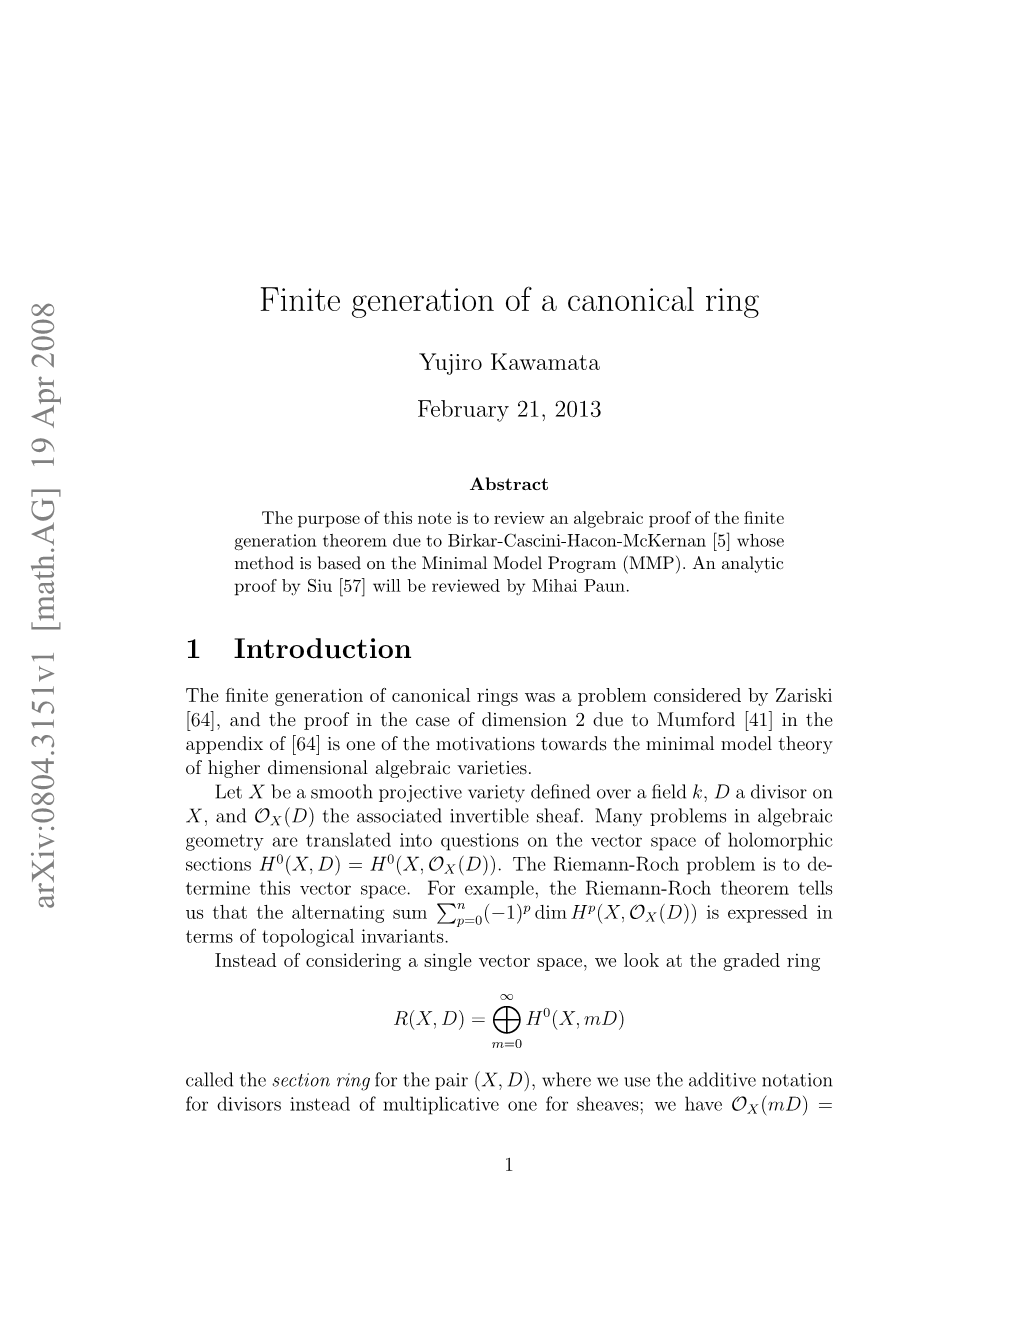 Finite Generation of a Canonical Ring